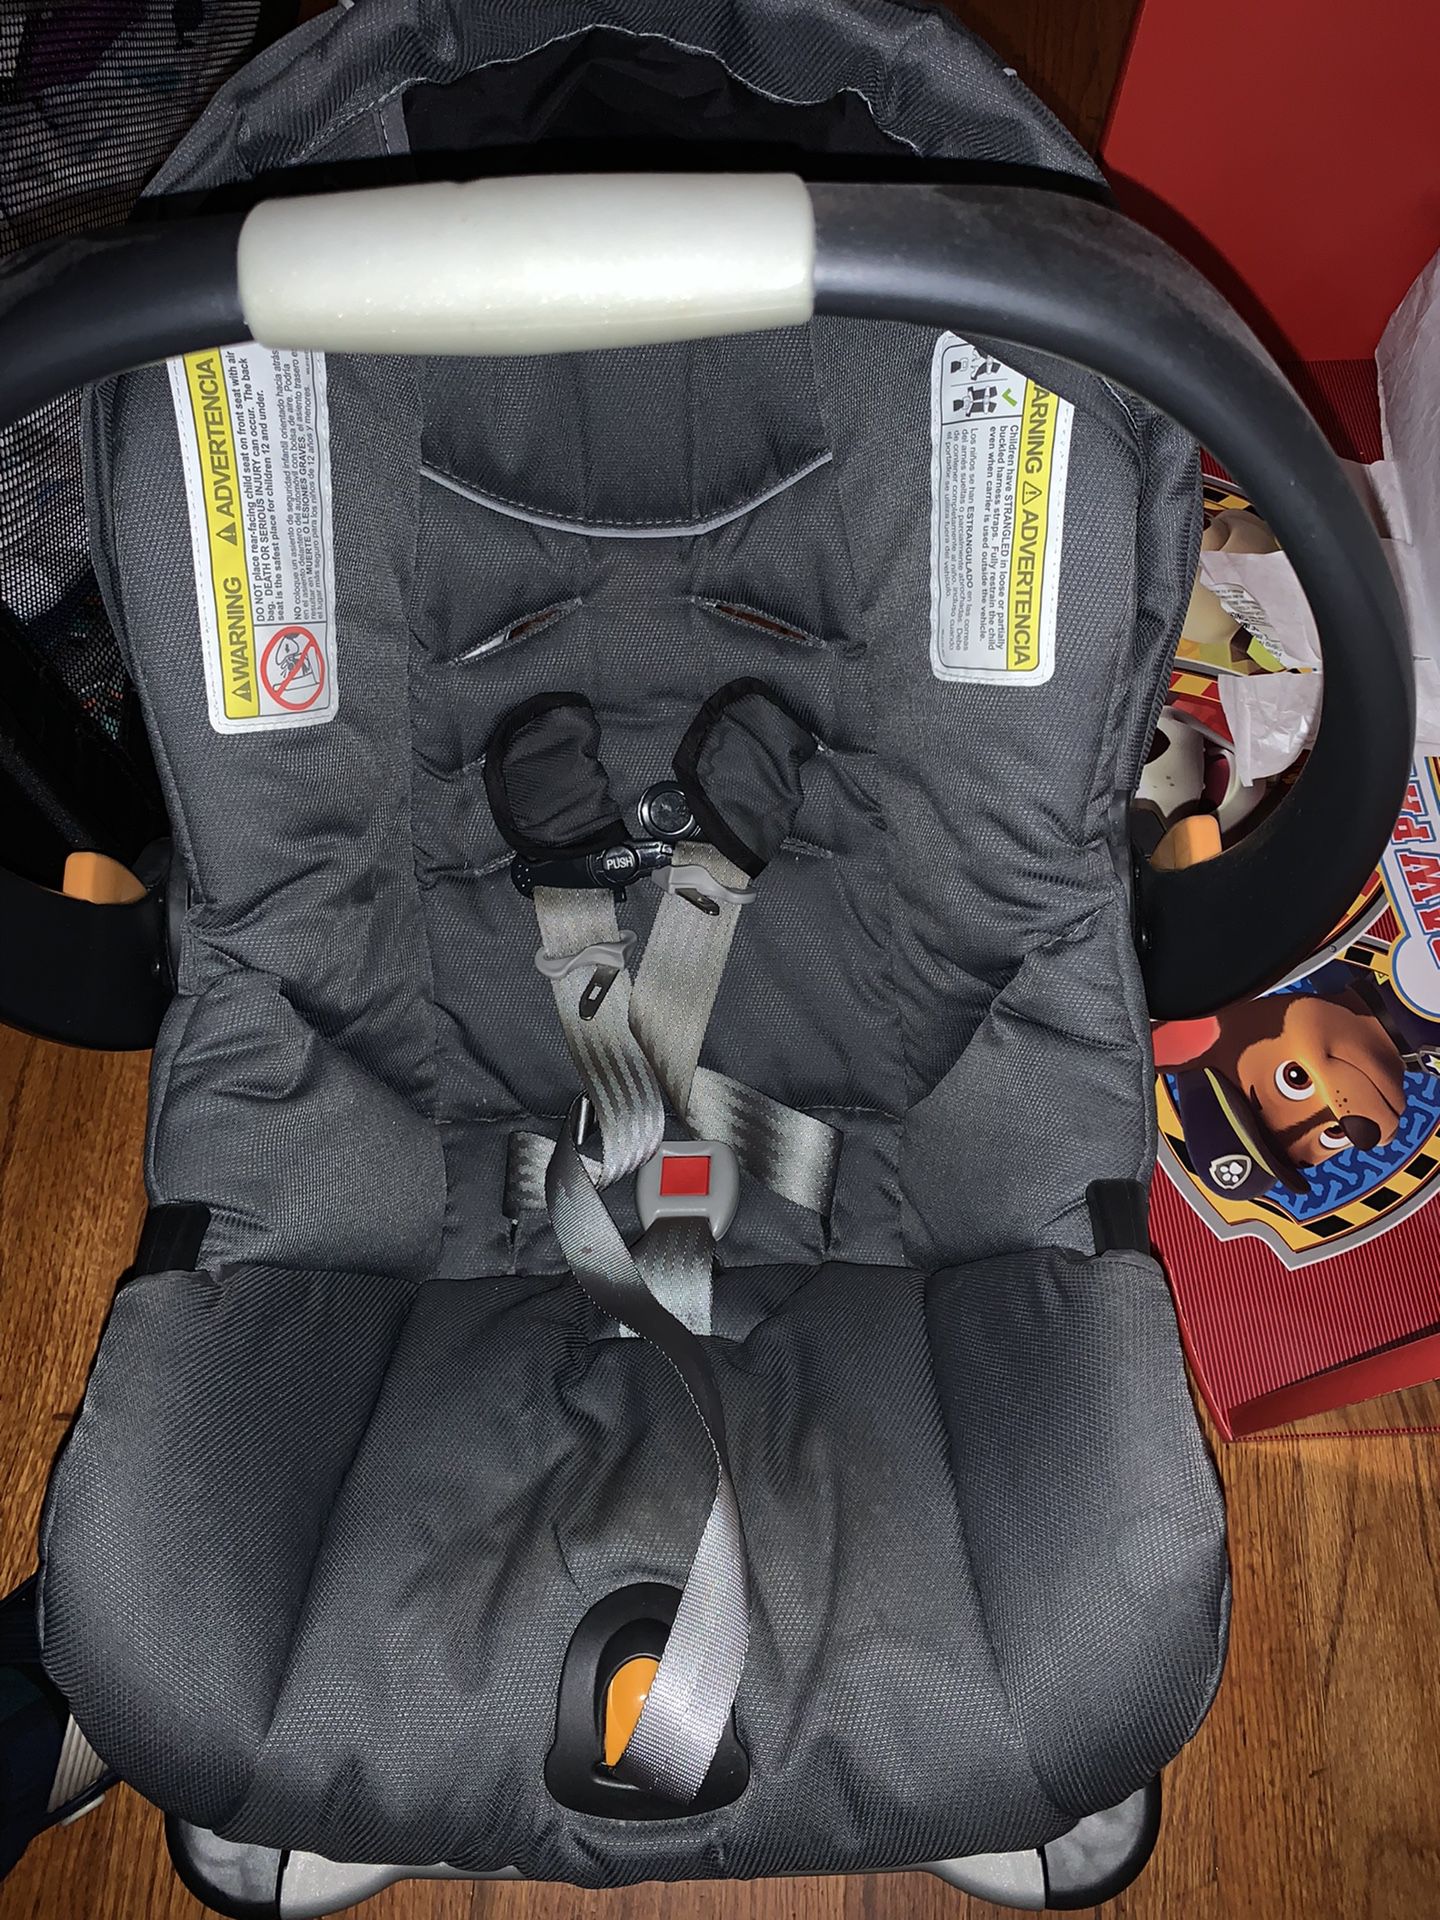 Free Chicco Keyfit 30 Car seat & Bases